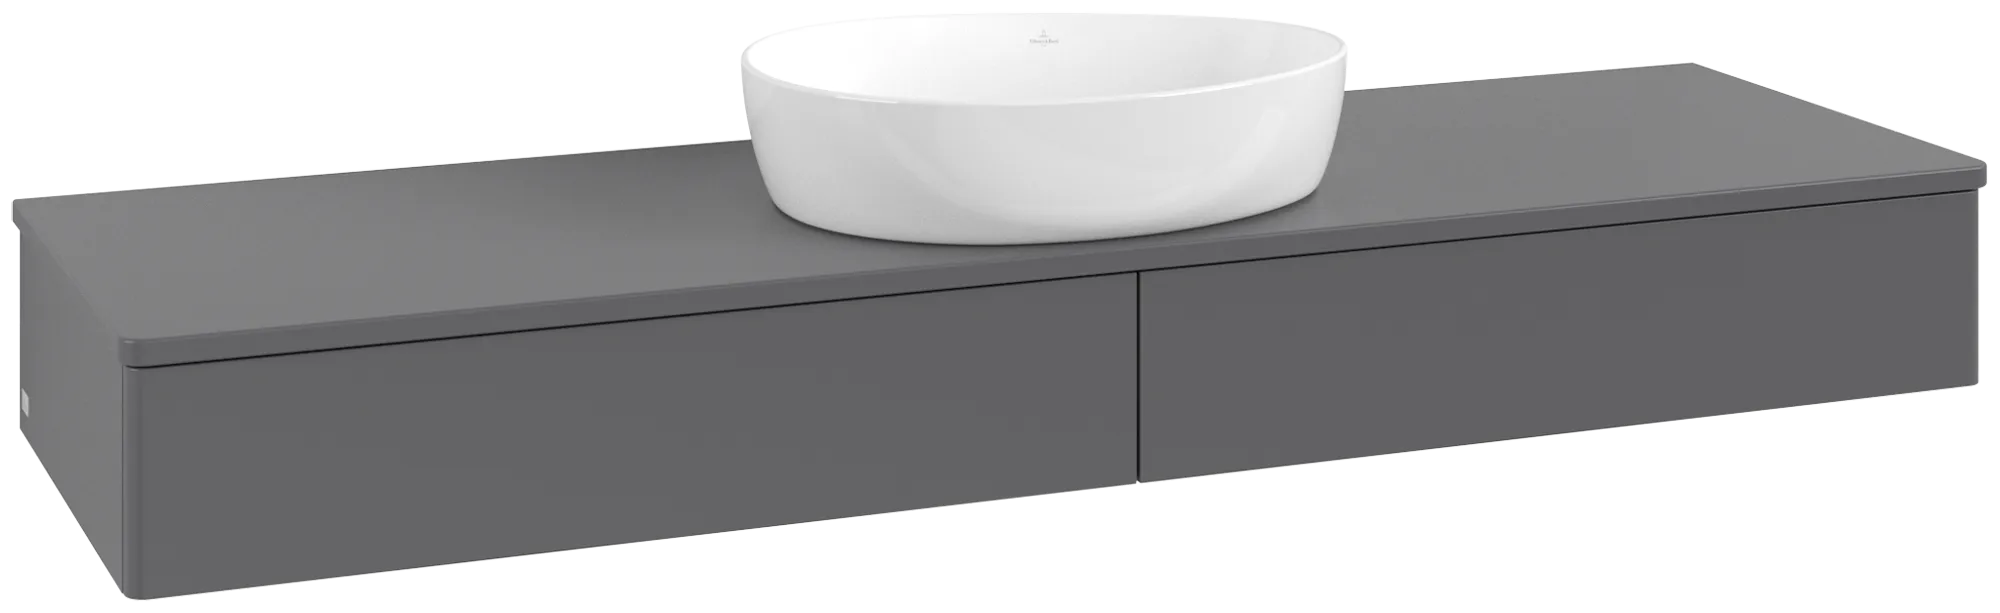 Obrázek VILLEROY BOCH Antao Vanity unit, with lighting, 2 pull-out compartments, 1600 x 190 x 500 mm, Front without structure, Anthracite Matt Lacquer / Anthracite Matt Lacquer #L14010GK